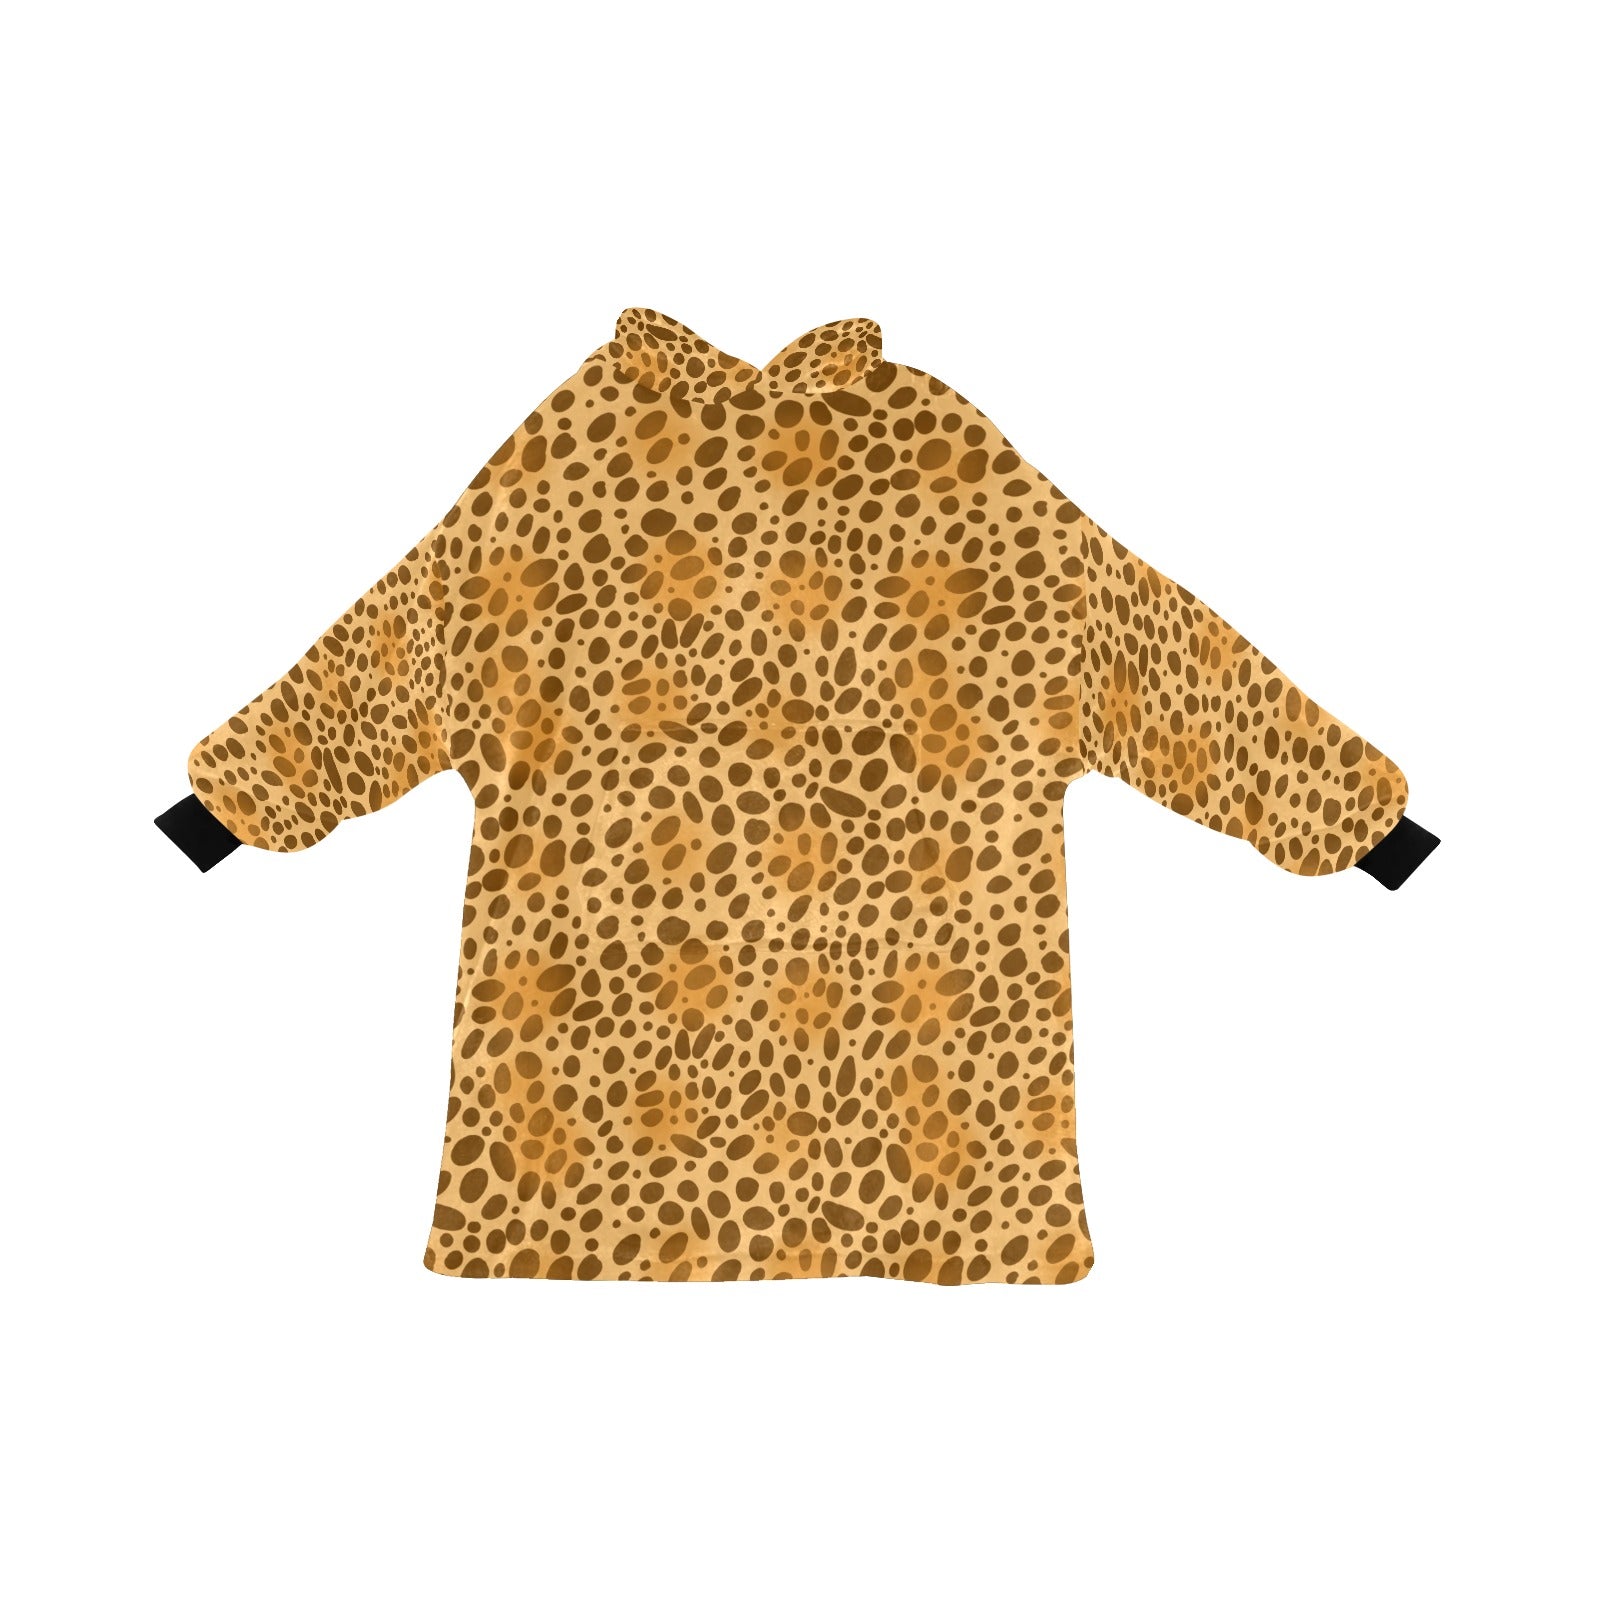 Leopard print fleece hooded blanket - Stay warm and trendy with this stylish and cozy fleece blanket featuring a striking leopard print pattern.